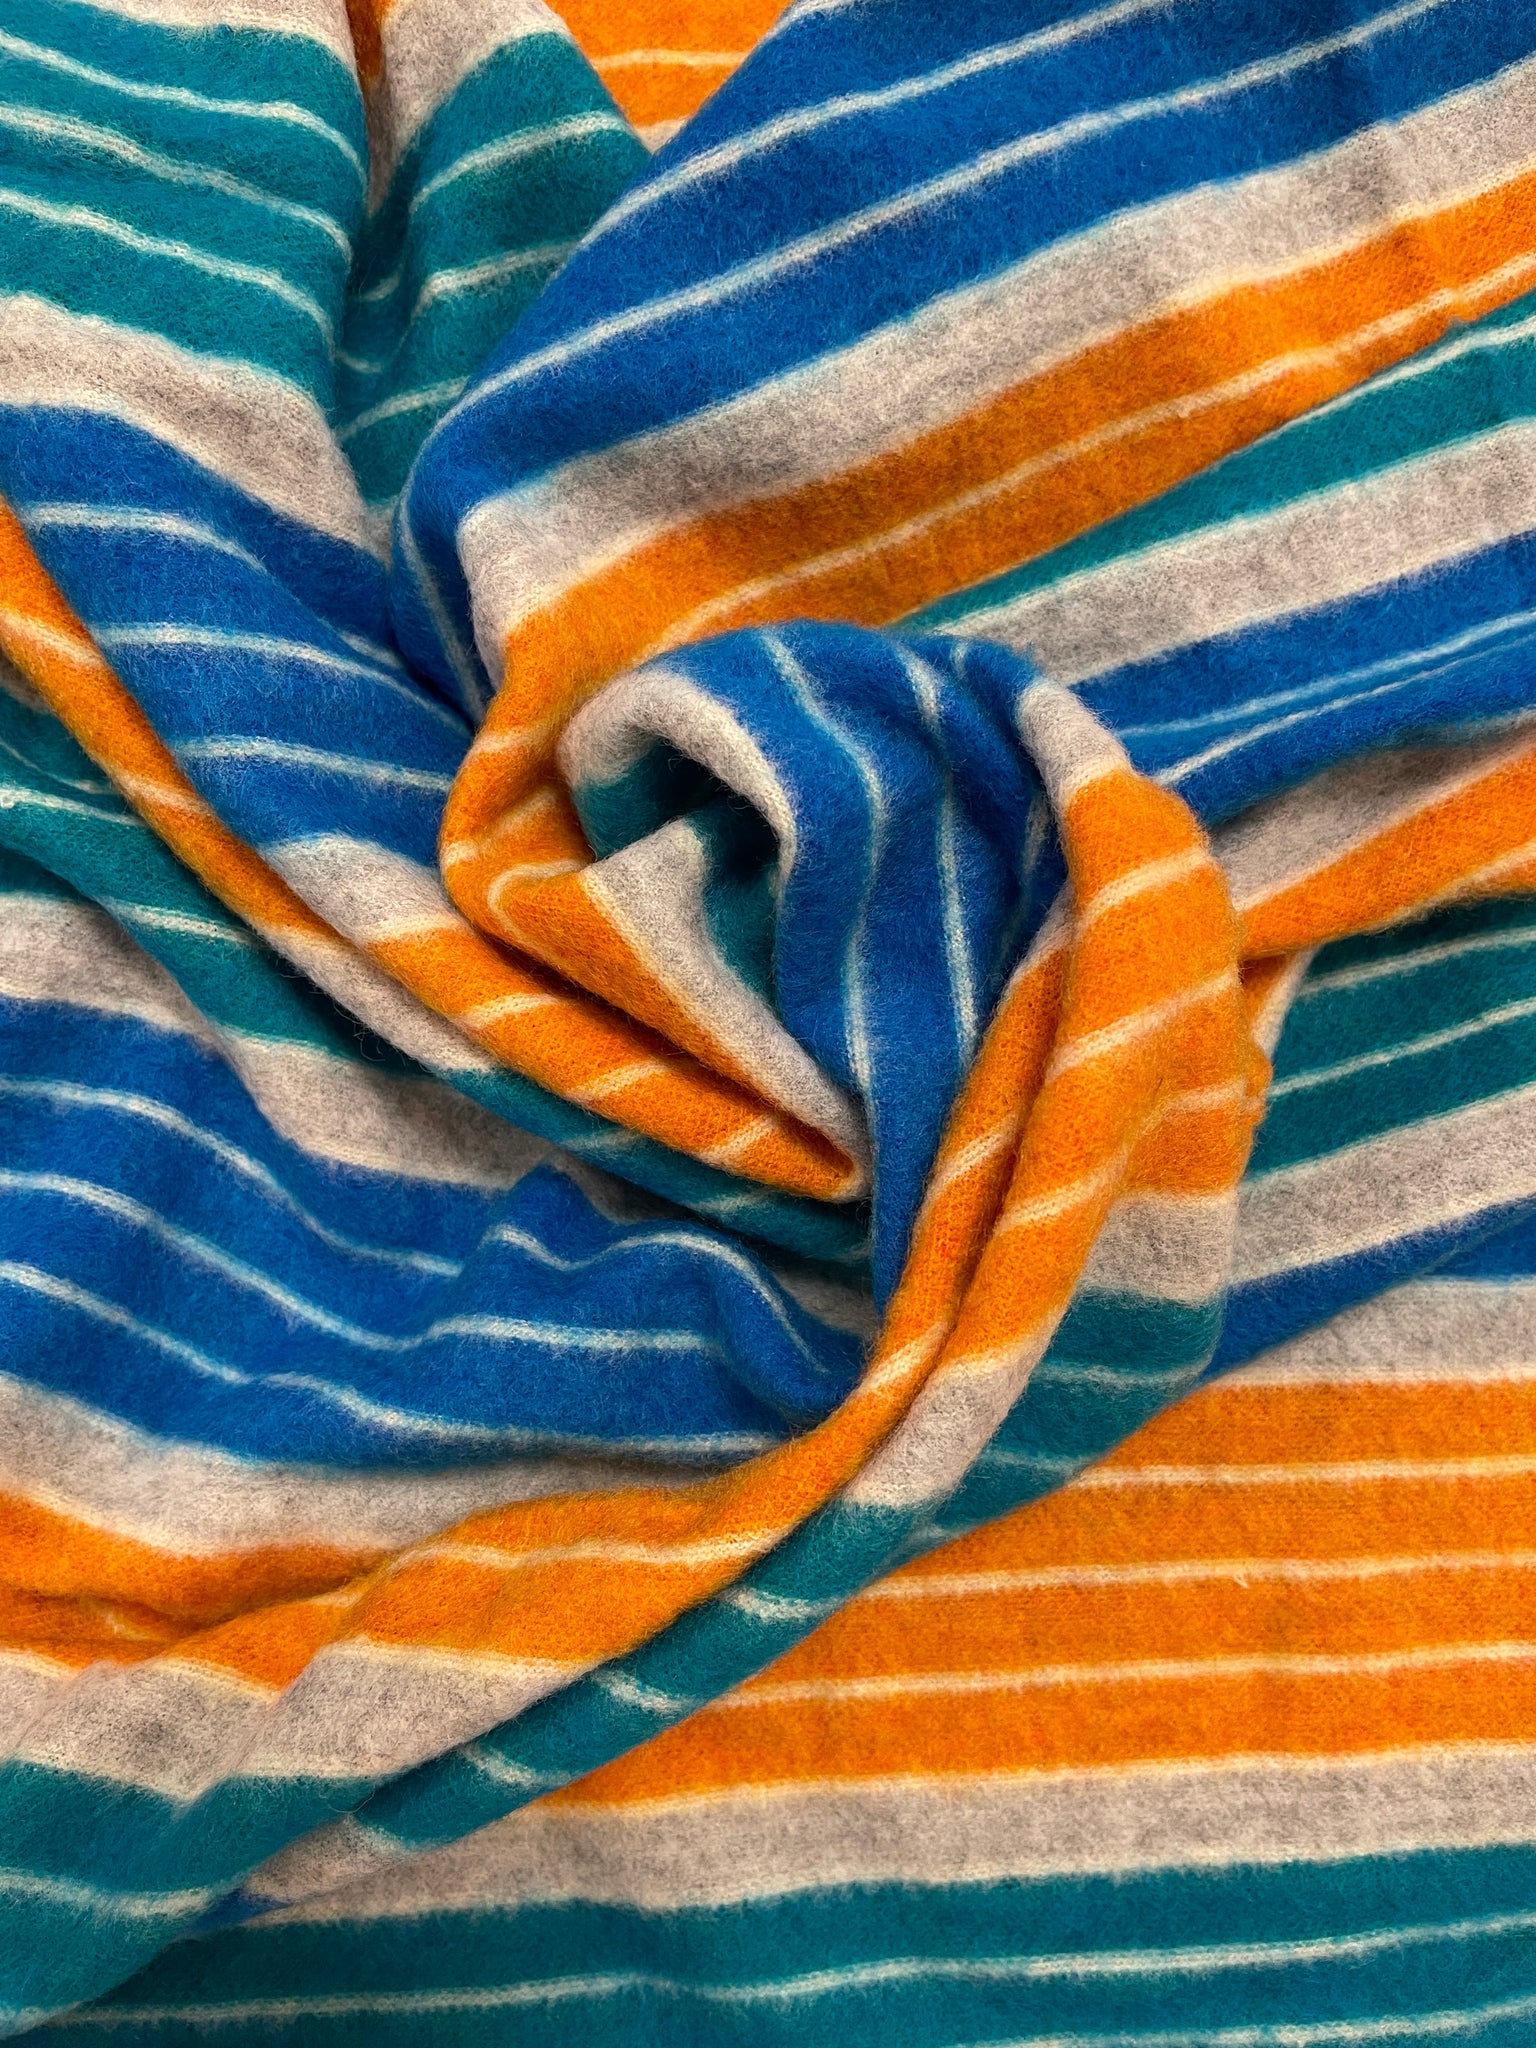 SALE 2 3/4 YD Vintage Polyester Brushed Knit - Blue, Golden Yellow, Teal & Gray Stripes